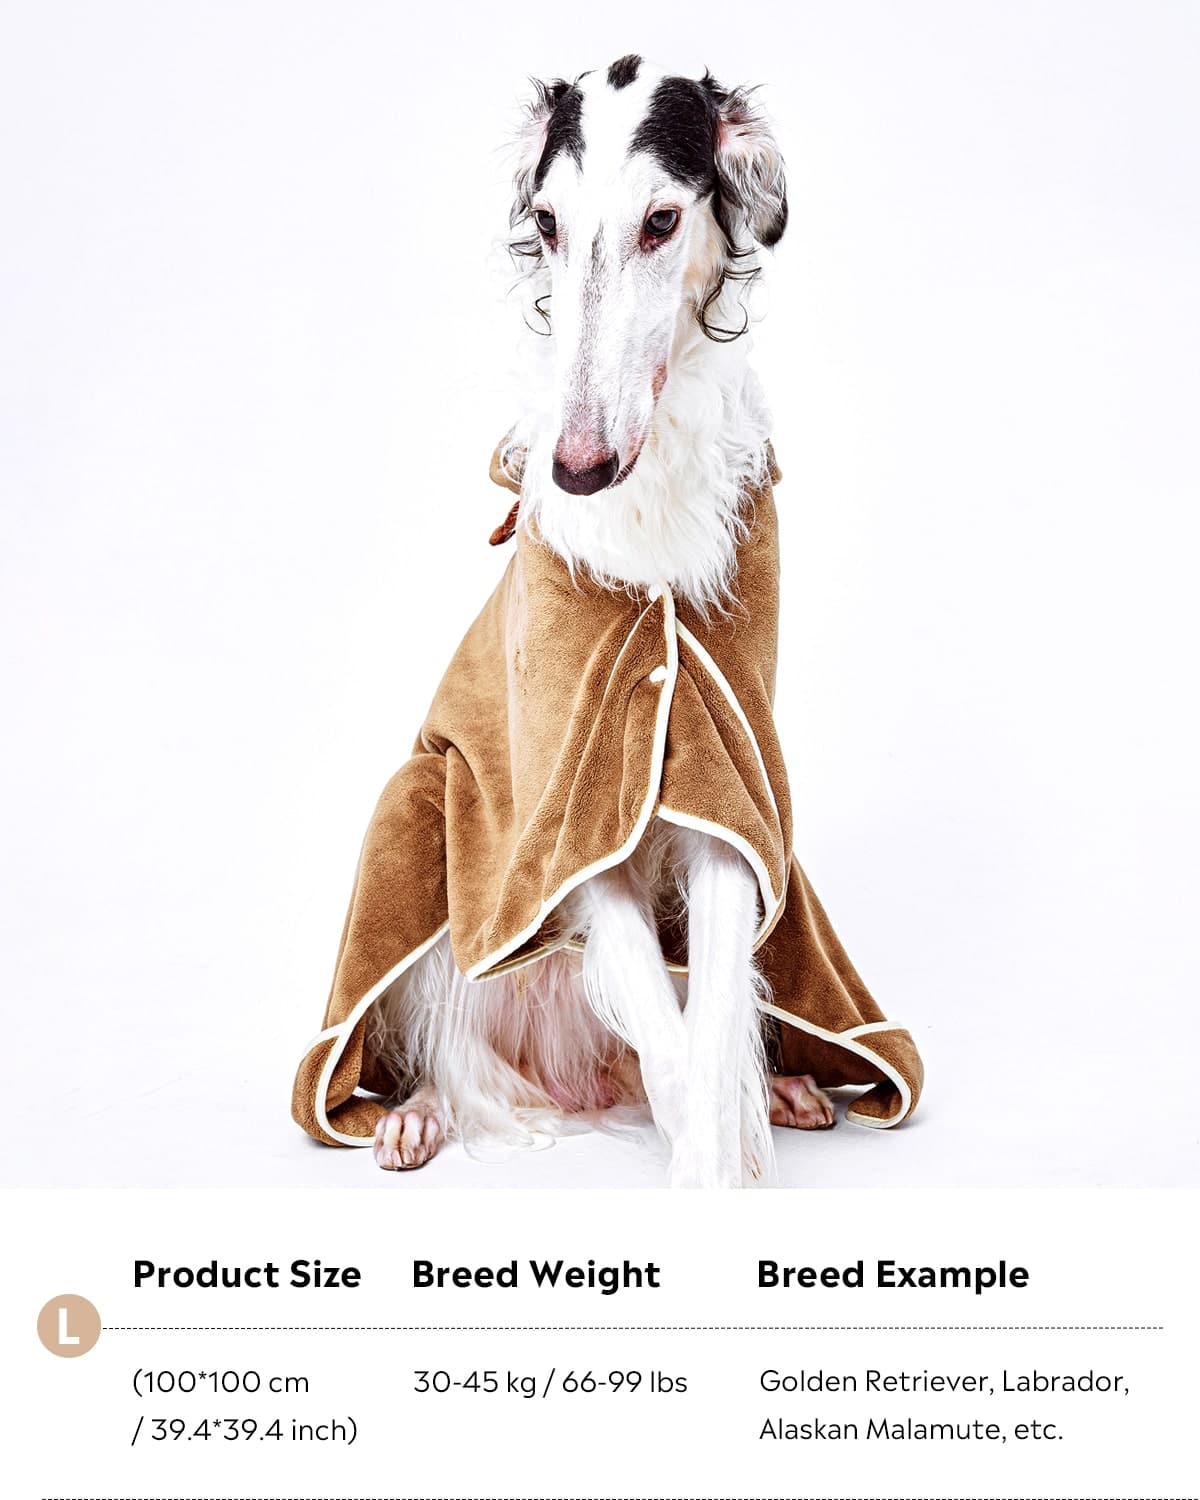 Large size uahpet bathrobe for breed of 66-99lbs